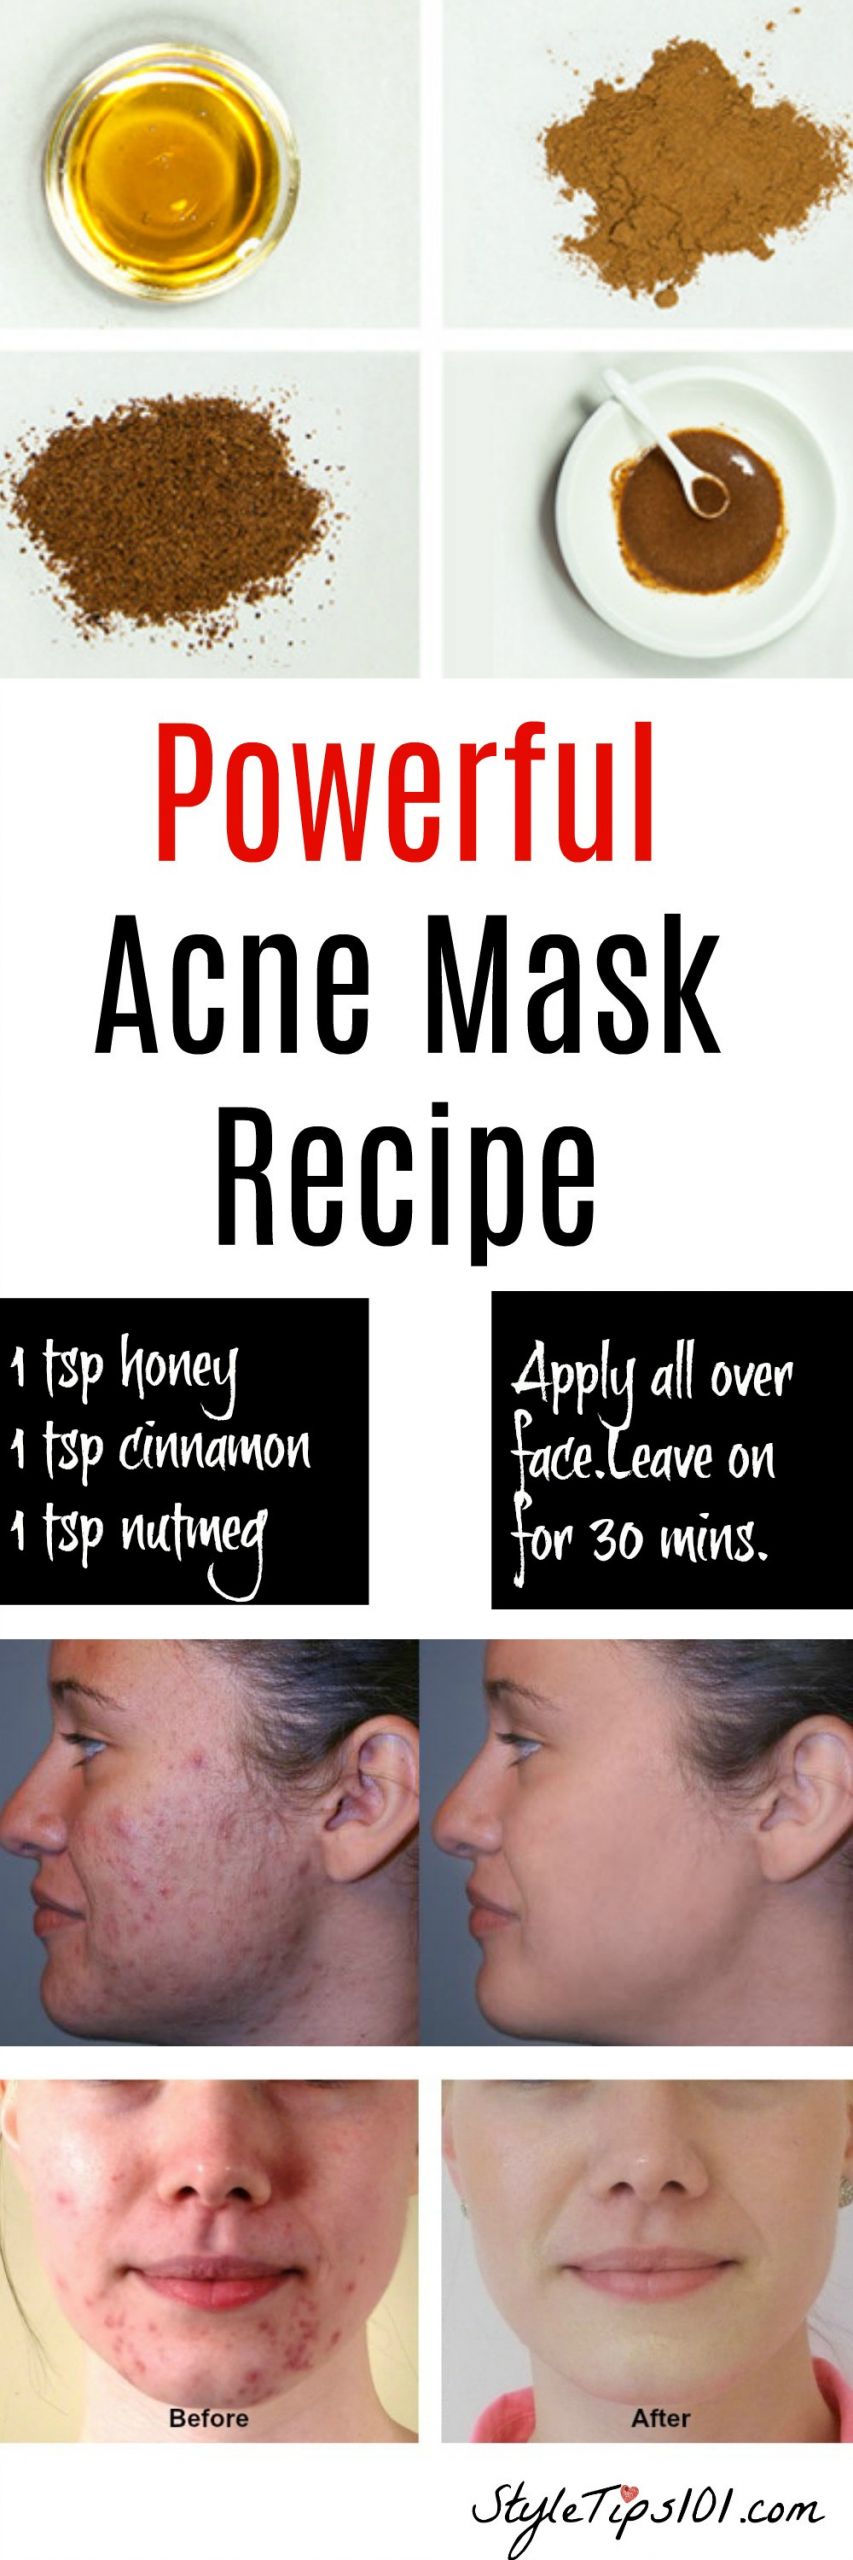 DIY Face Mask For Acne
 Homemade Natural Acne Mask